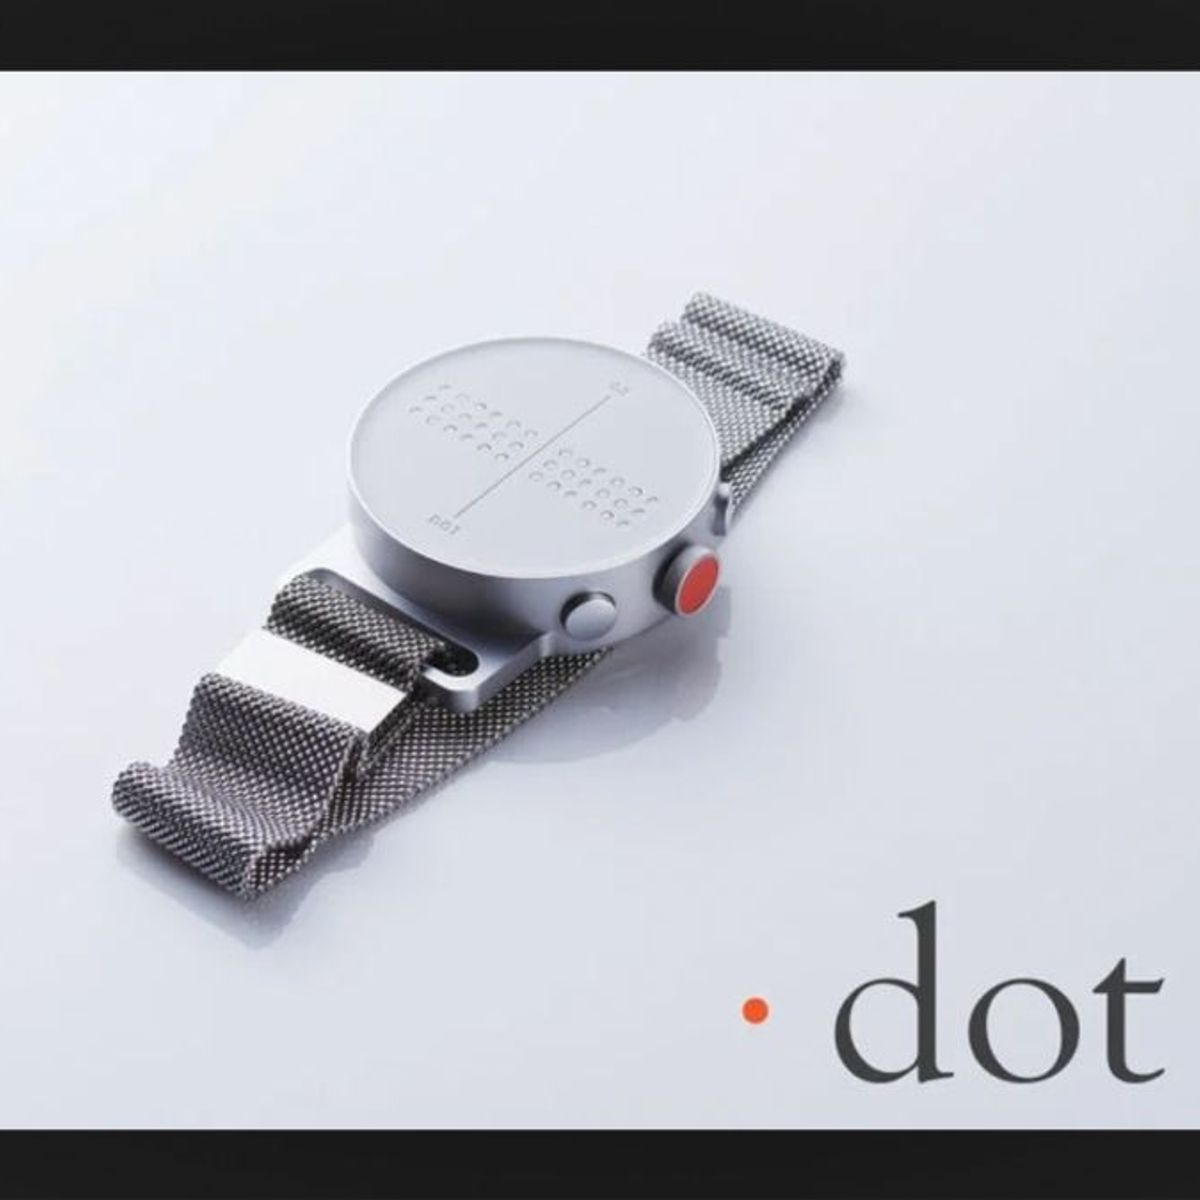 dot watch is a stylish braille device designed for the visually impaired